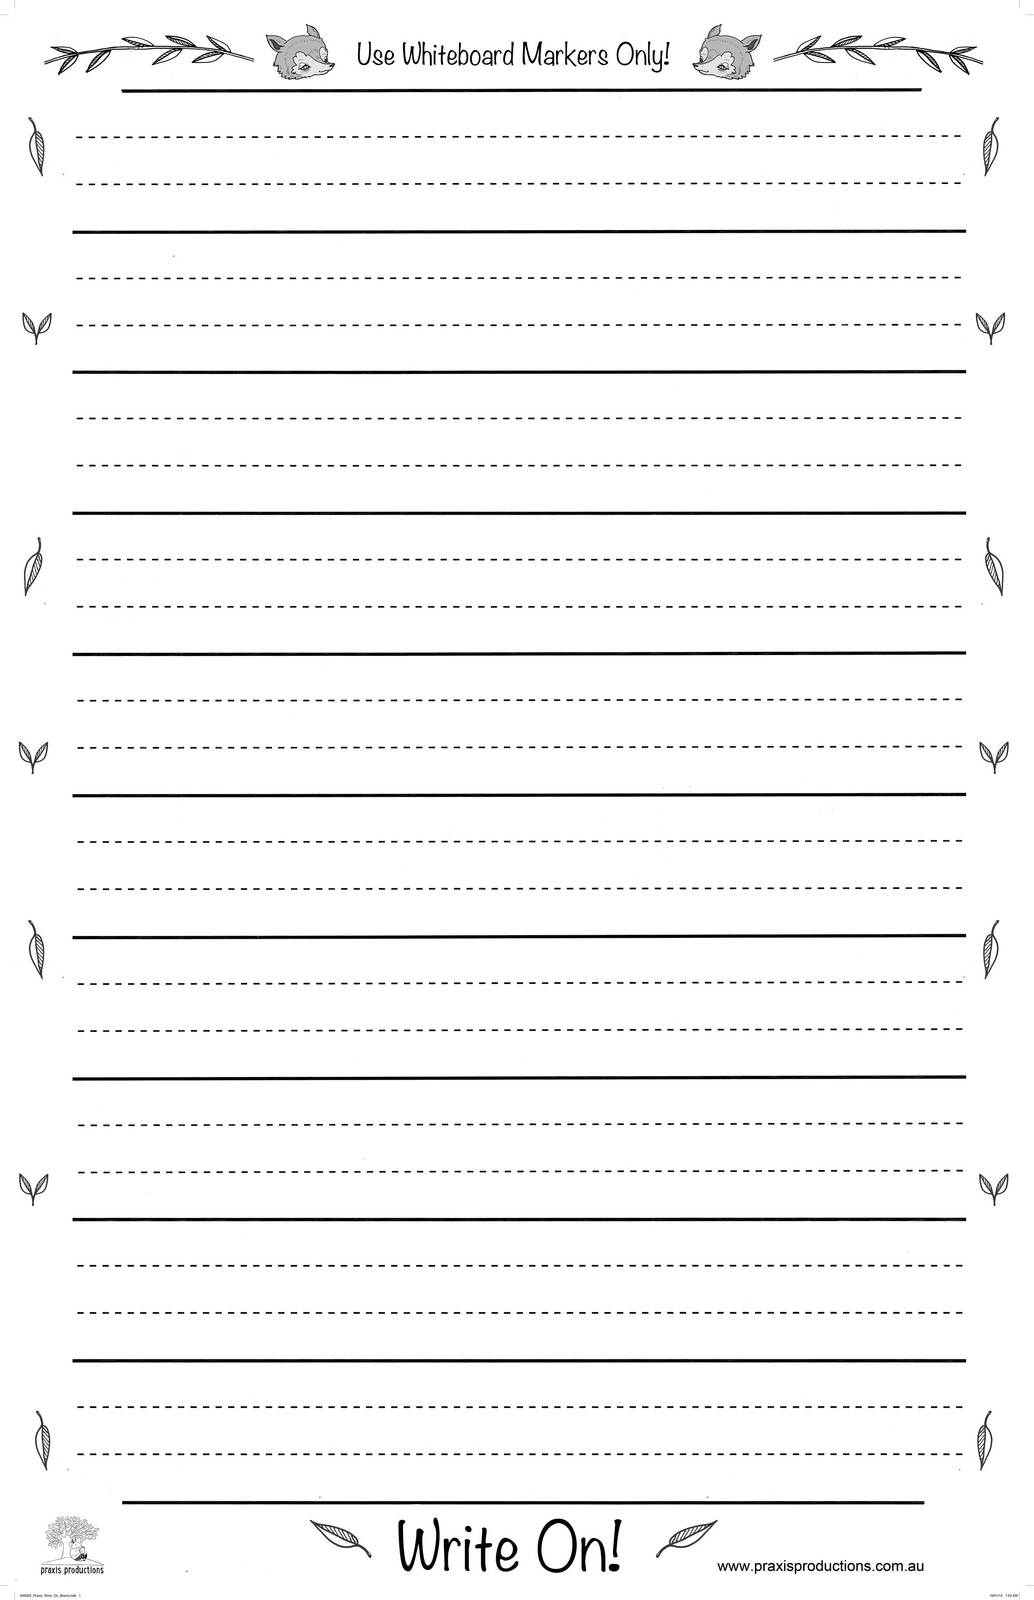 Write On Large Laminated Dotted Thirds Chart Praxis Productions 